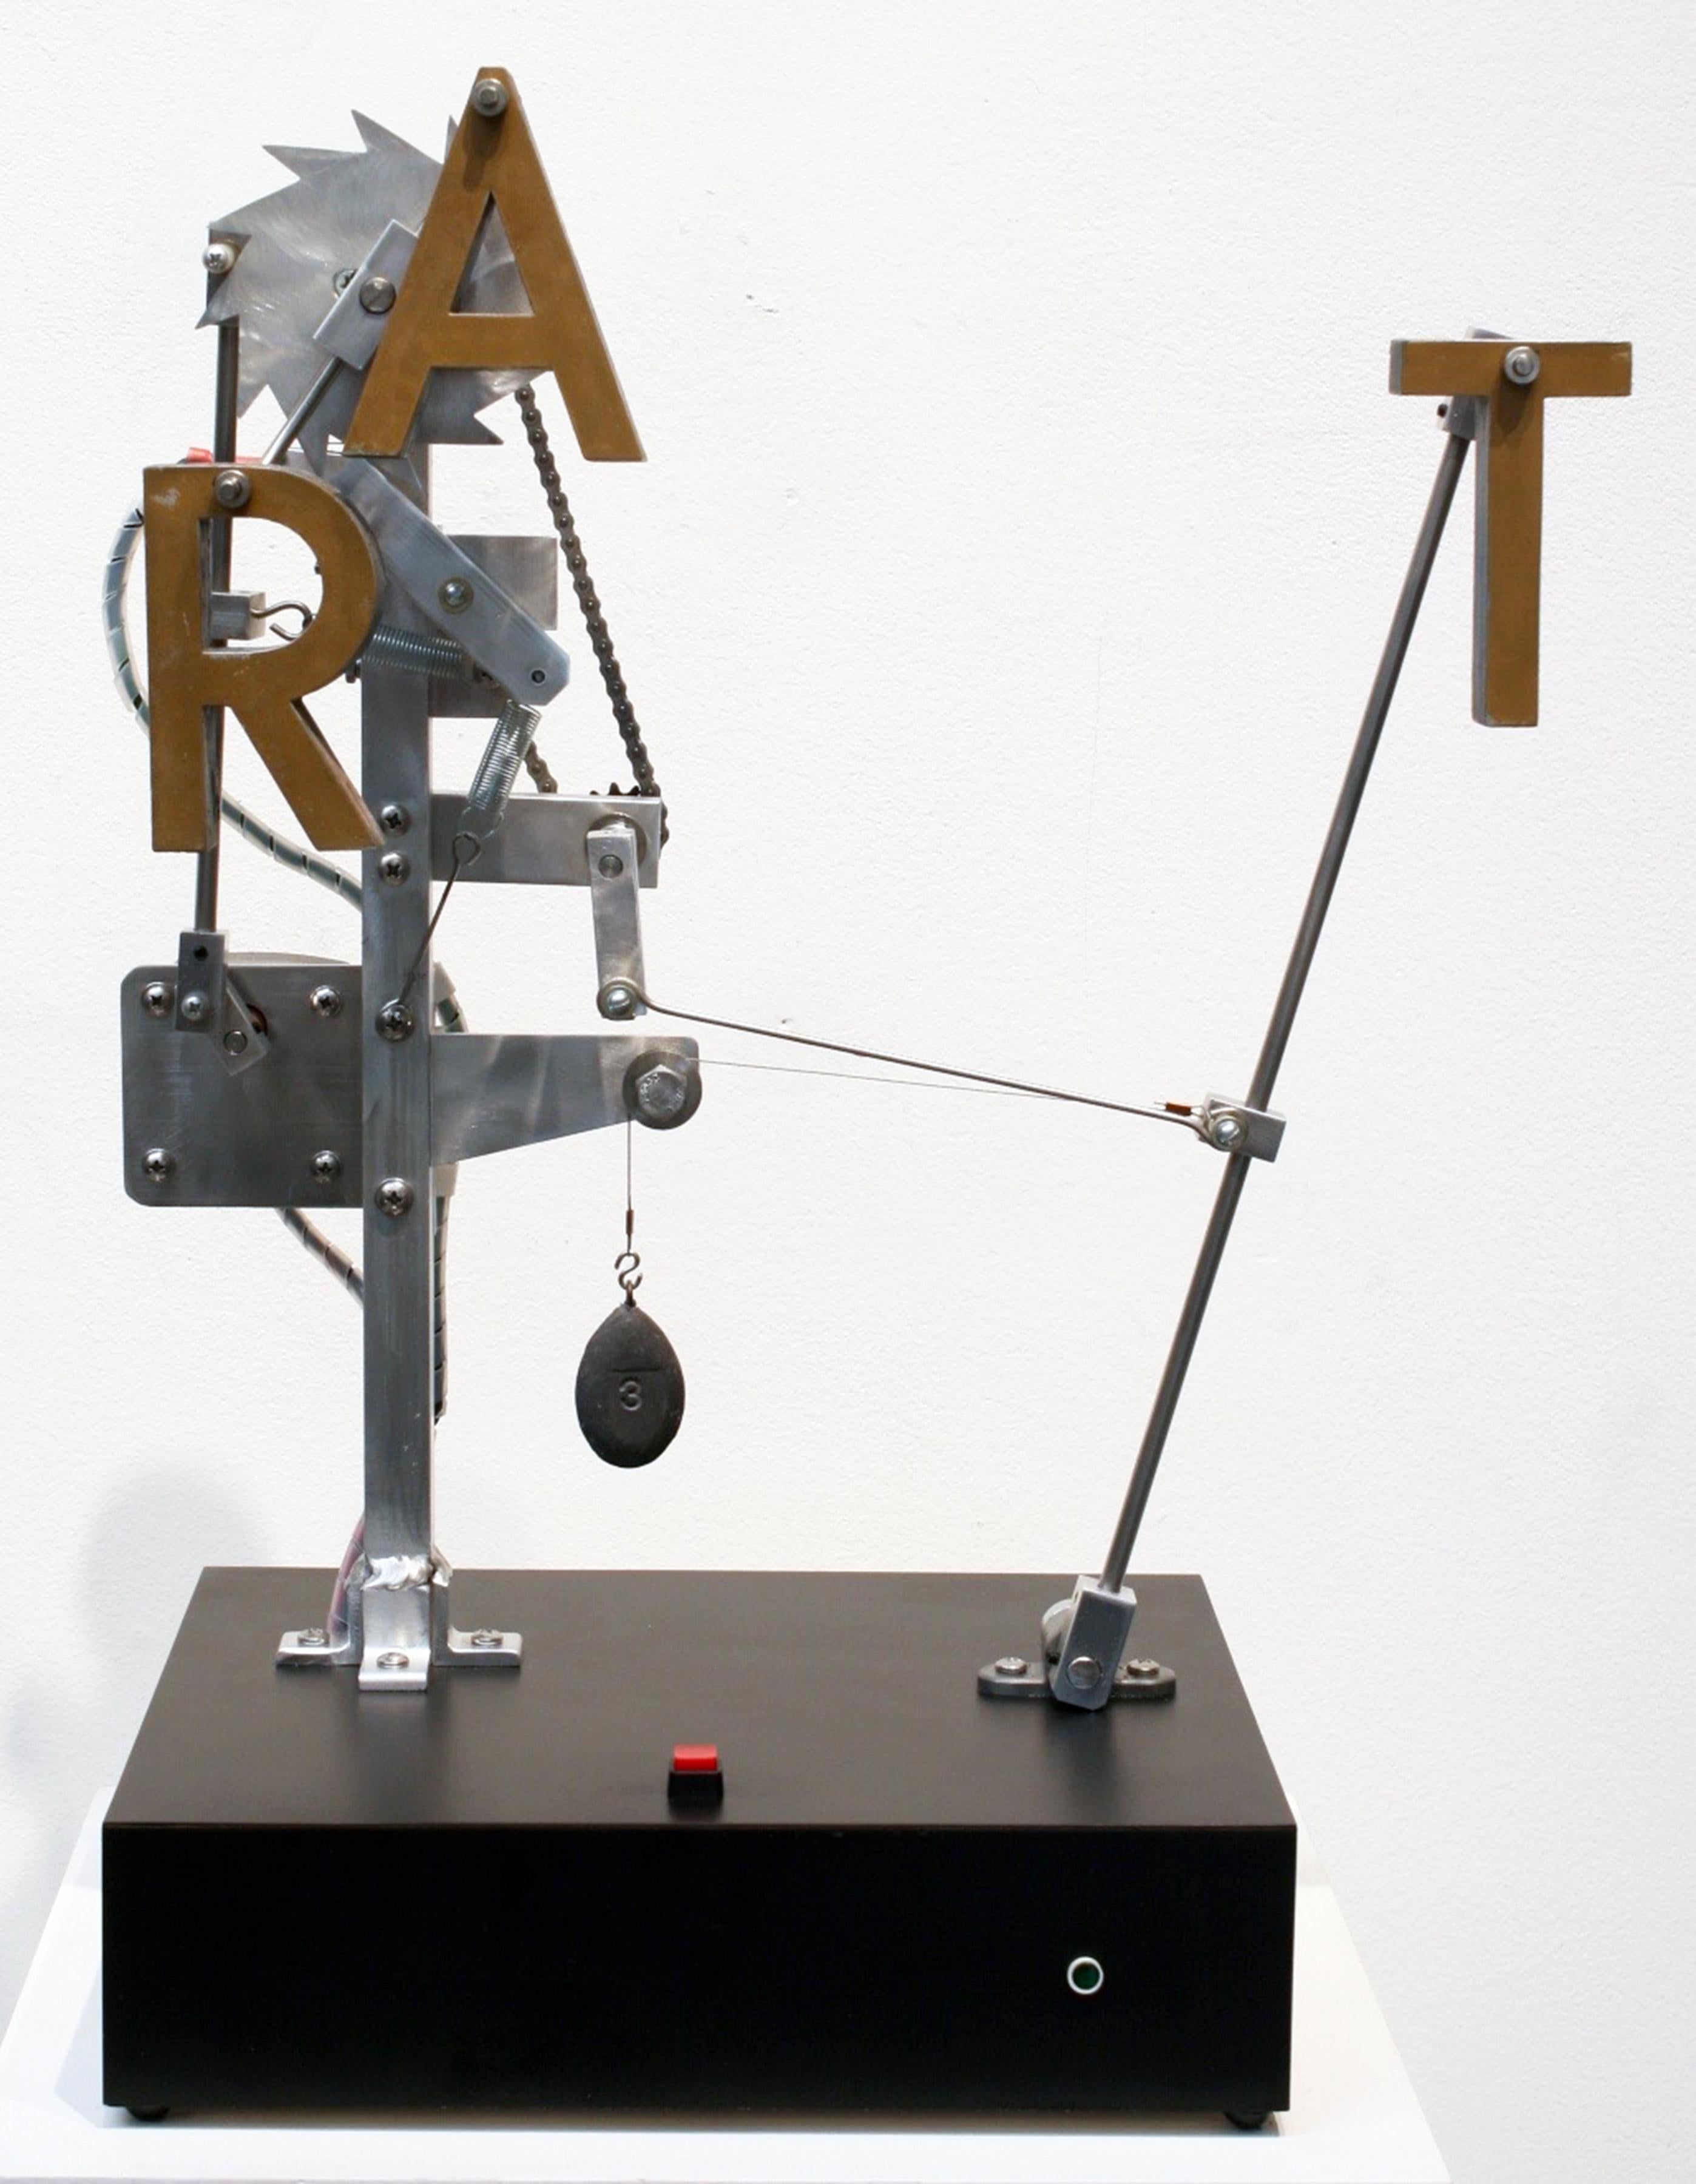 Jim Jenkins’ “ART RAT” is a contemporary electronic, motor-operated sculpture, made with aluminum and vintage pieces measuring 22” x 18” x 10”. By pressing the red button, the letters change from “ART” to “RAT” and back to “ART”. Inspired by